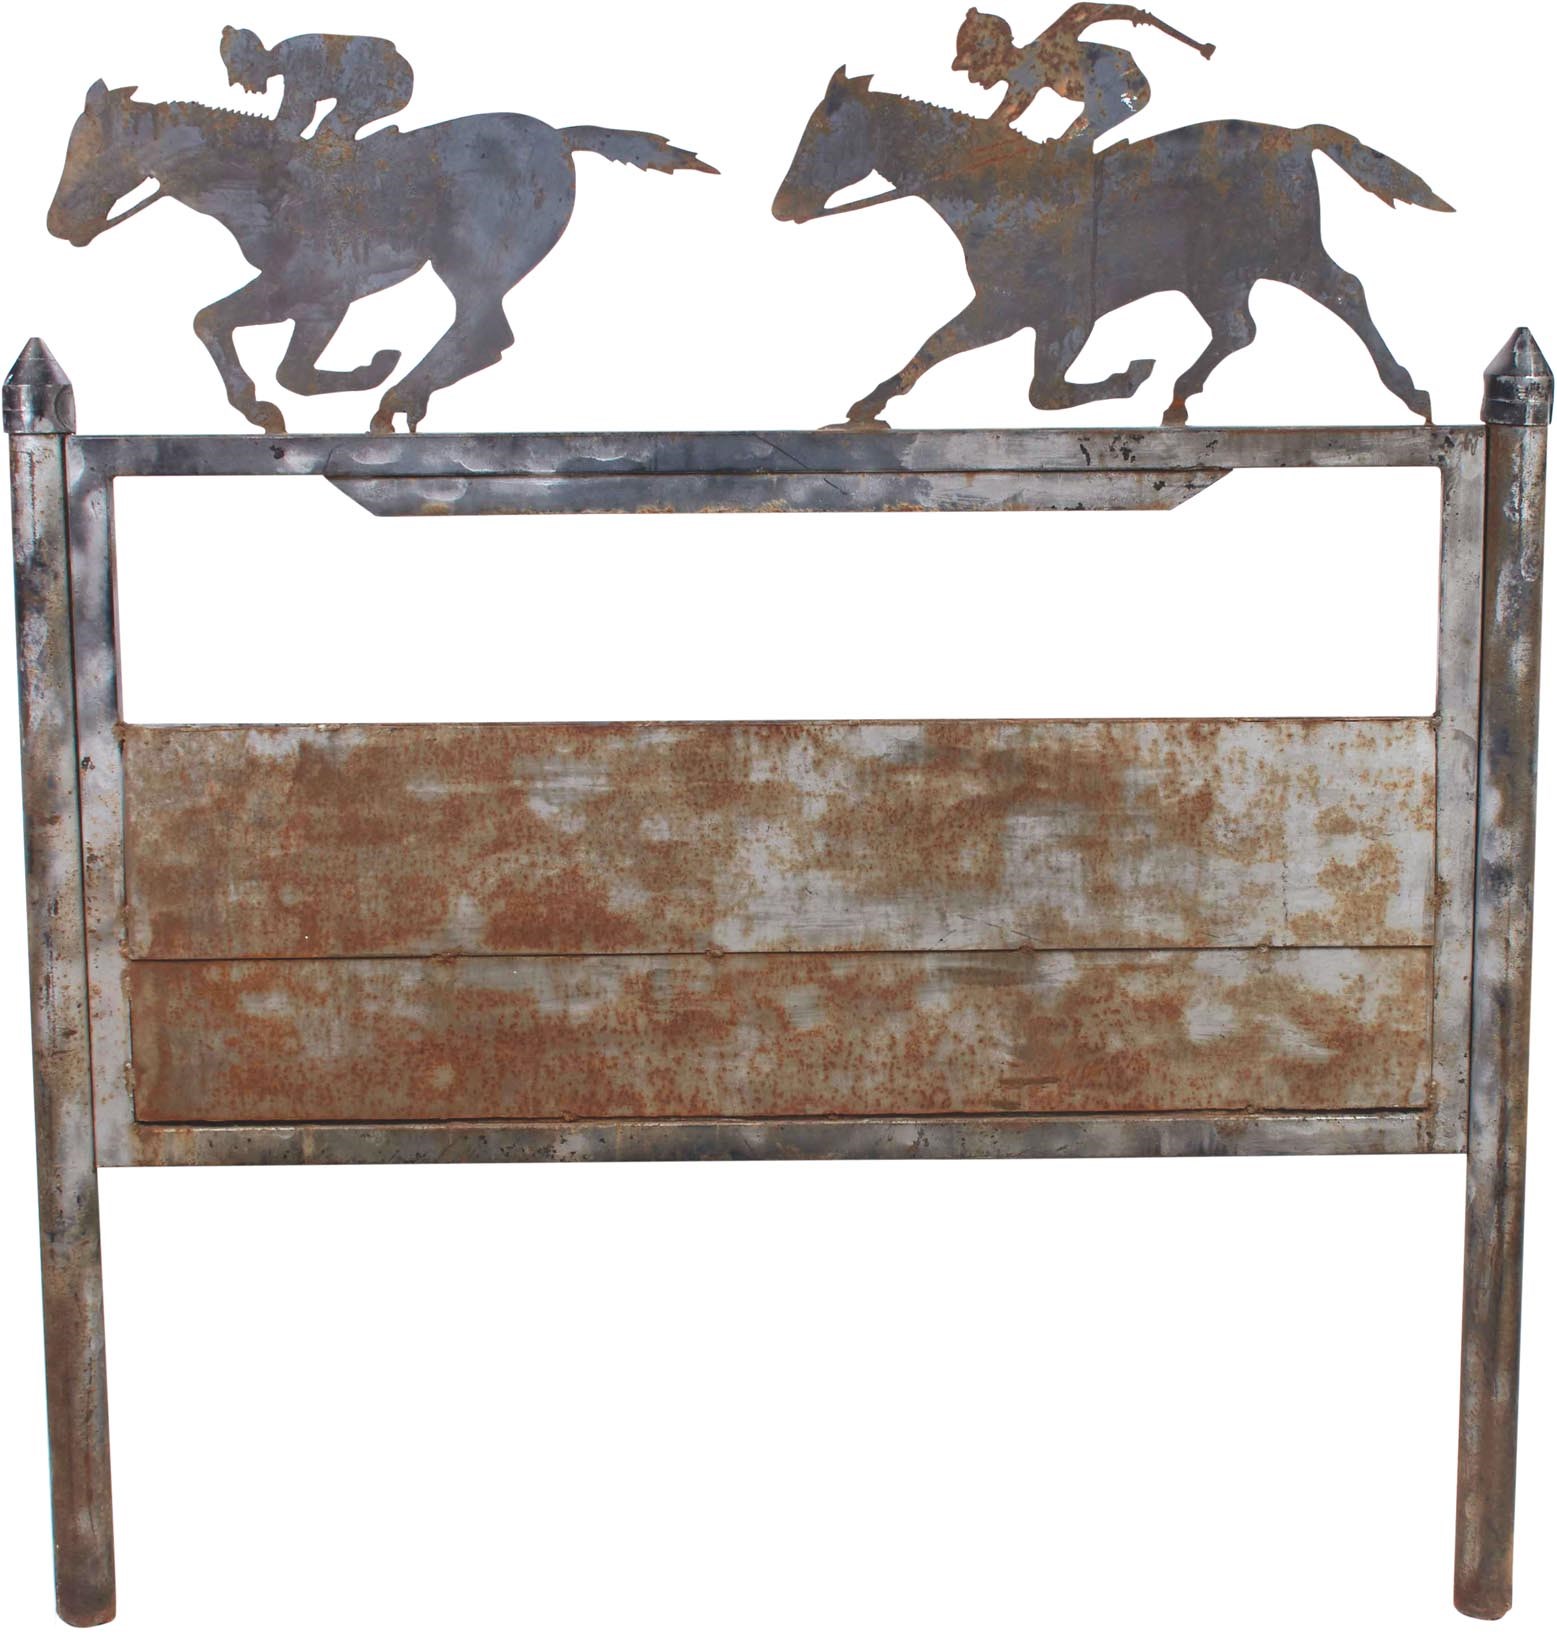 - Exceptional 1930s Horse Racing Stable Cast Iron Trade Sign